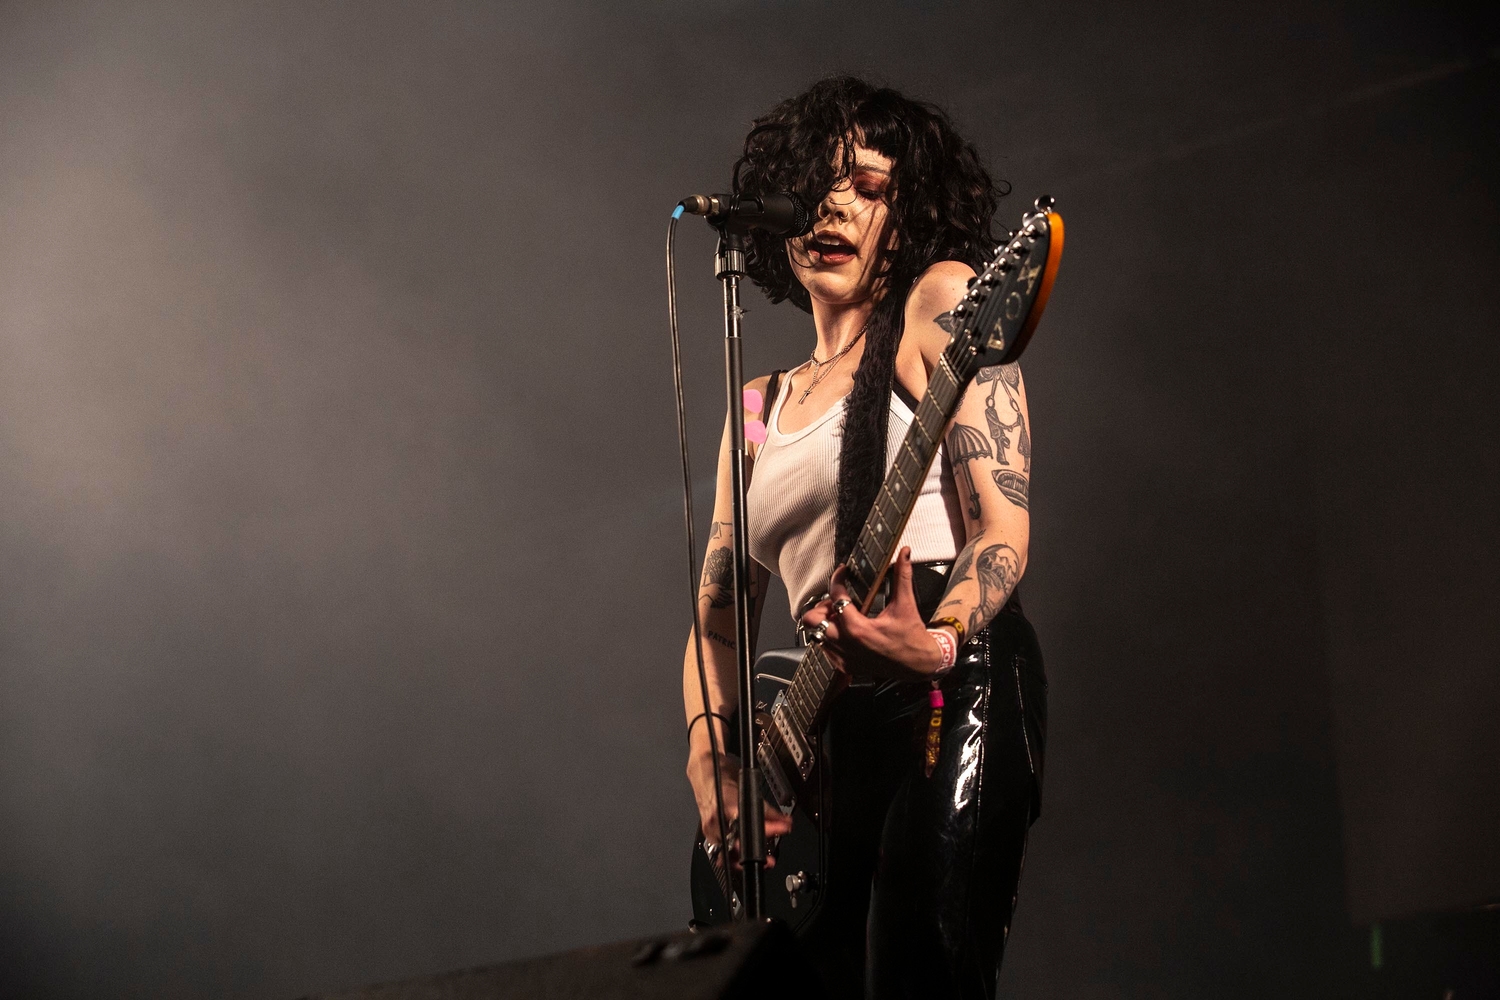 Pale Waves’ Heather Baron-Gracie gets ready for Glastonbury 2019: “I have high expectations”